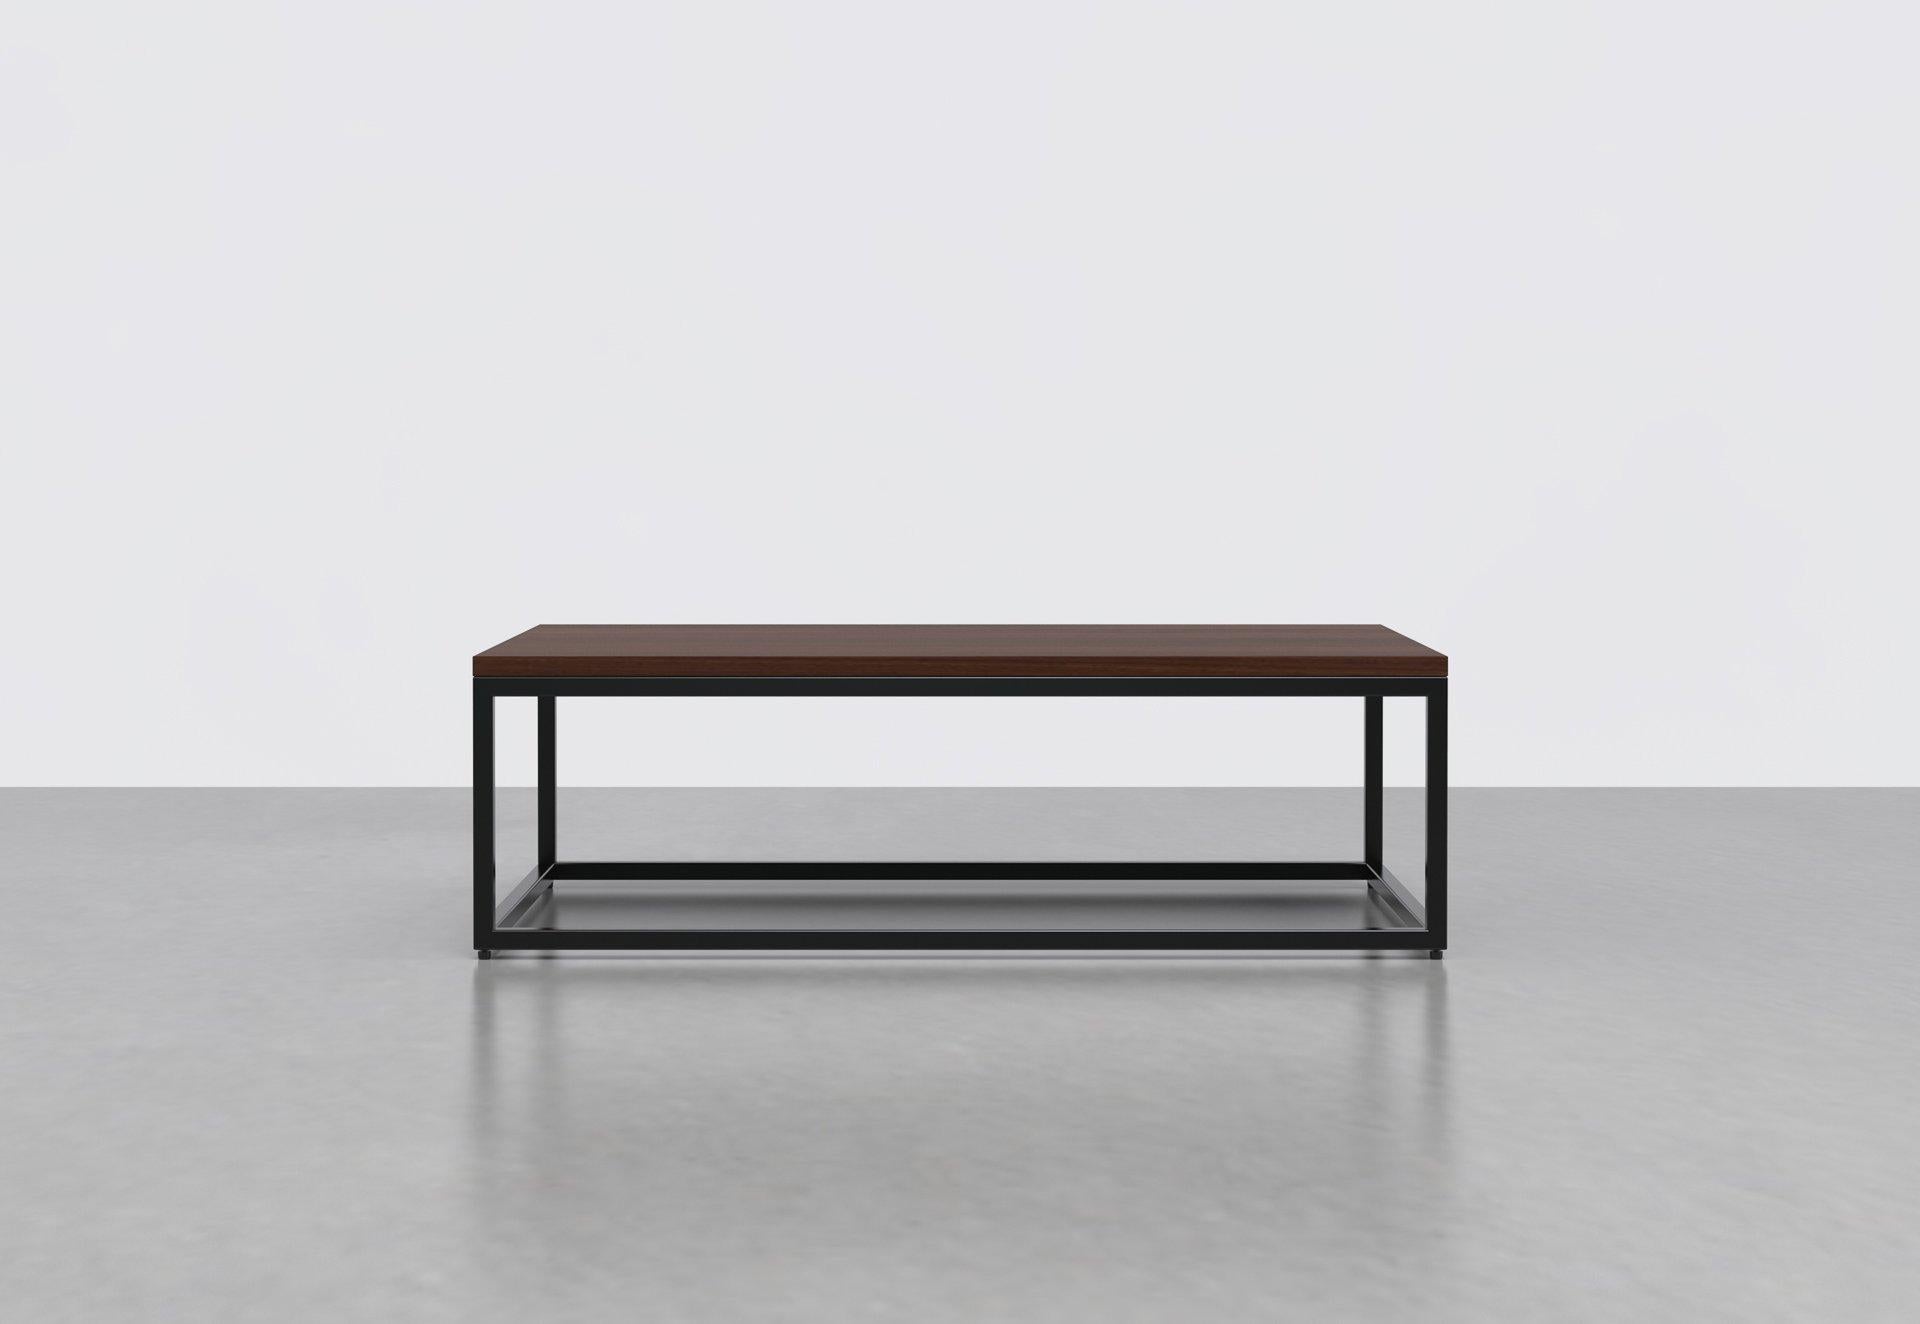 The 1 x 1 coffee table's simple frame allows you to fit it into any space and pairs well with any interior style. Great in any living room or lobby area. Measures: 42